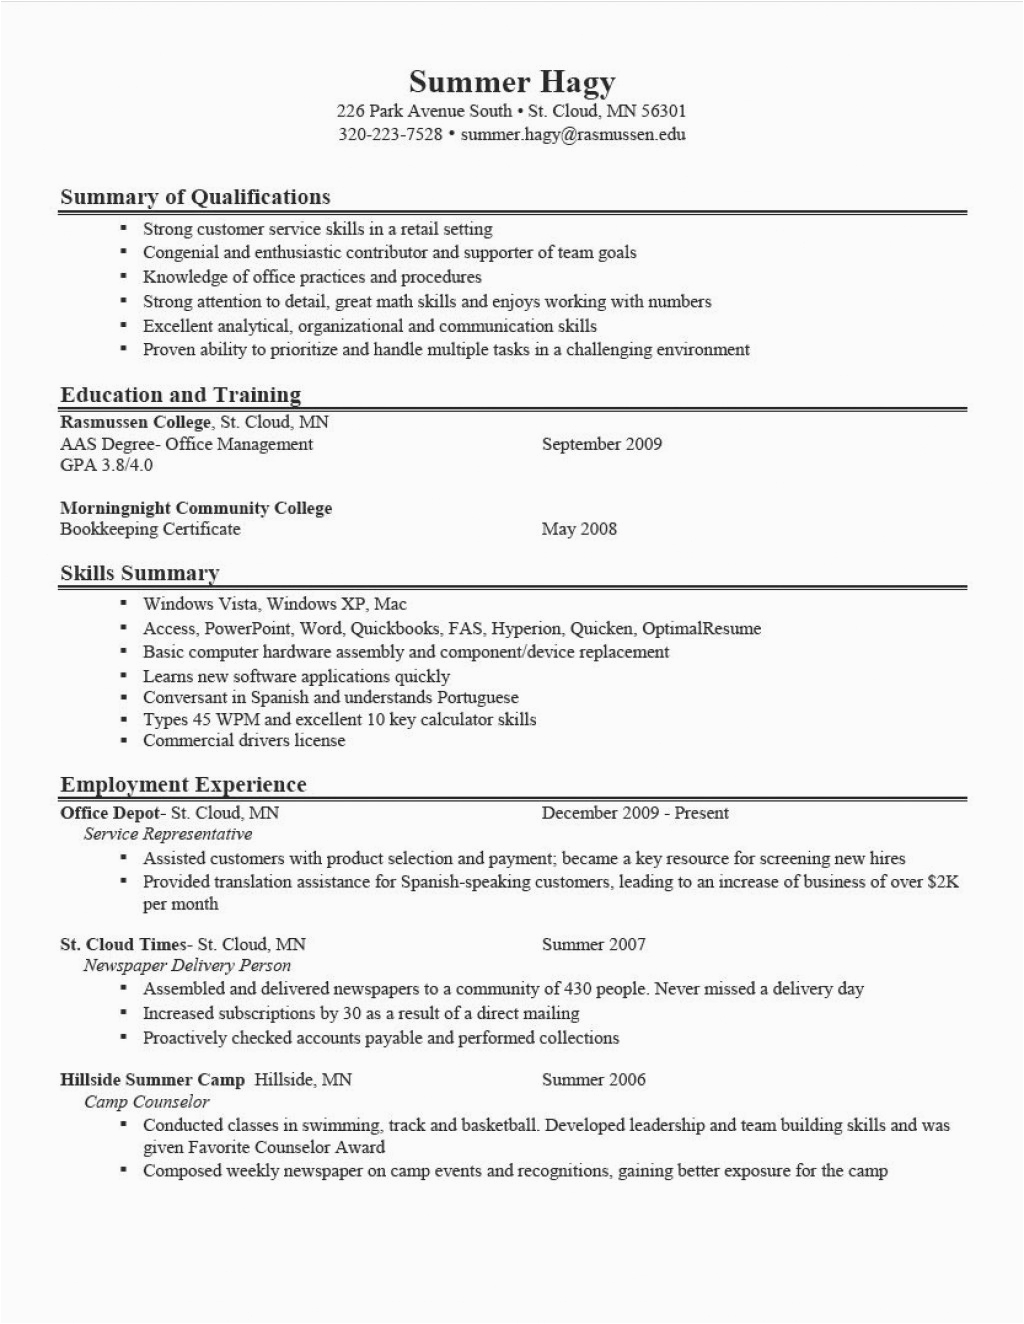 Sample Job Objectives for A Resume Good Resume Objective Examples for Any Job Image Media